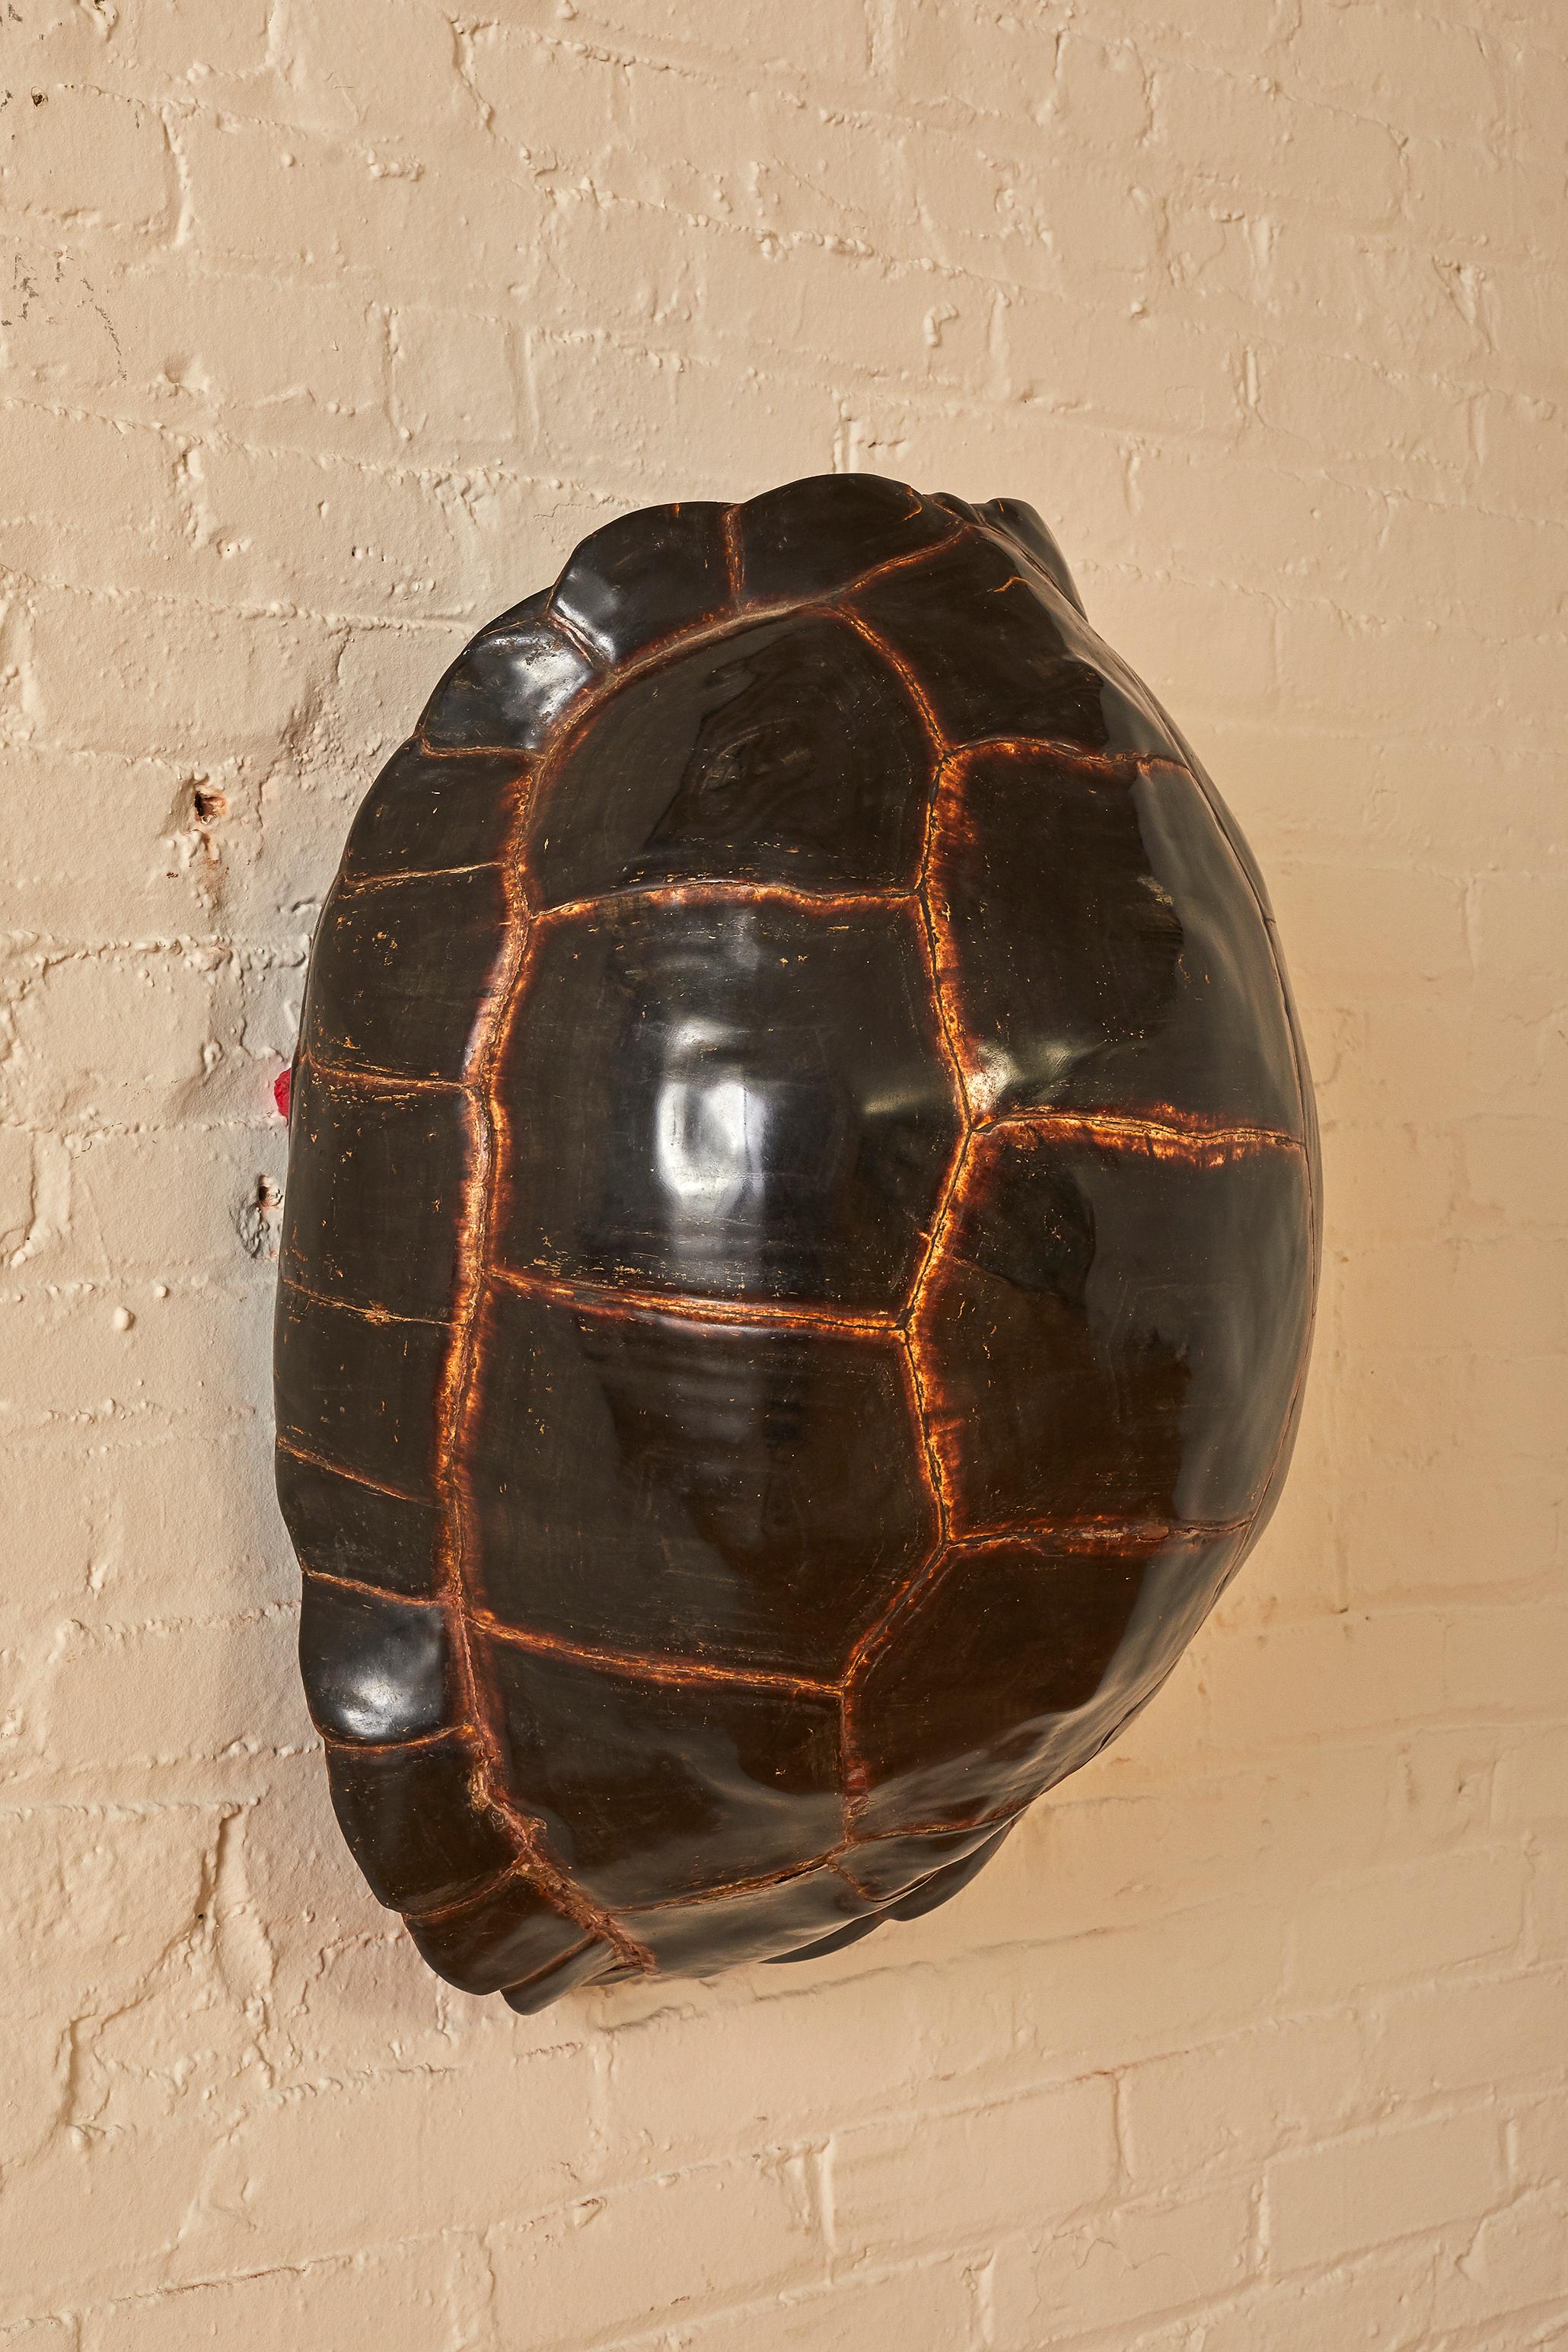 200 Year Old tortoise shell. 

